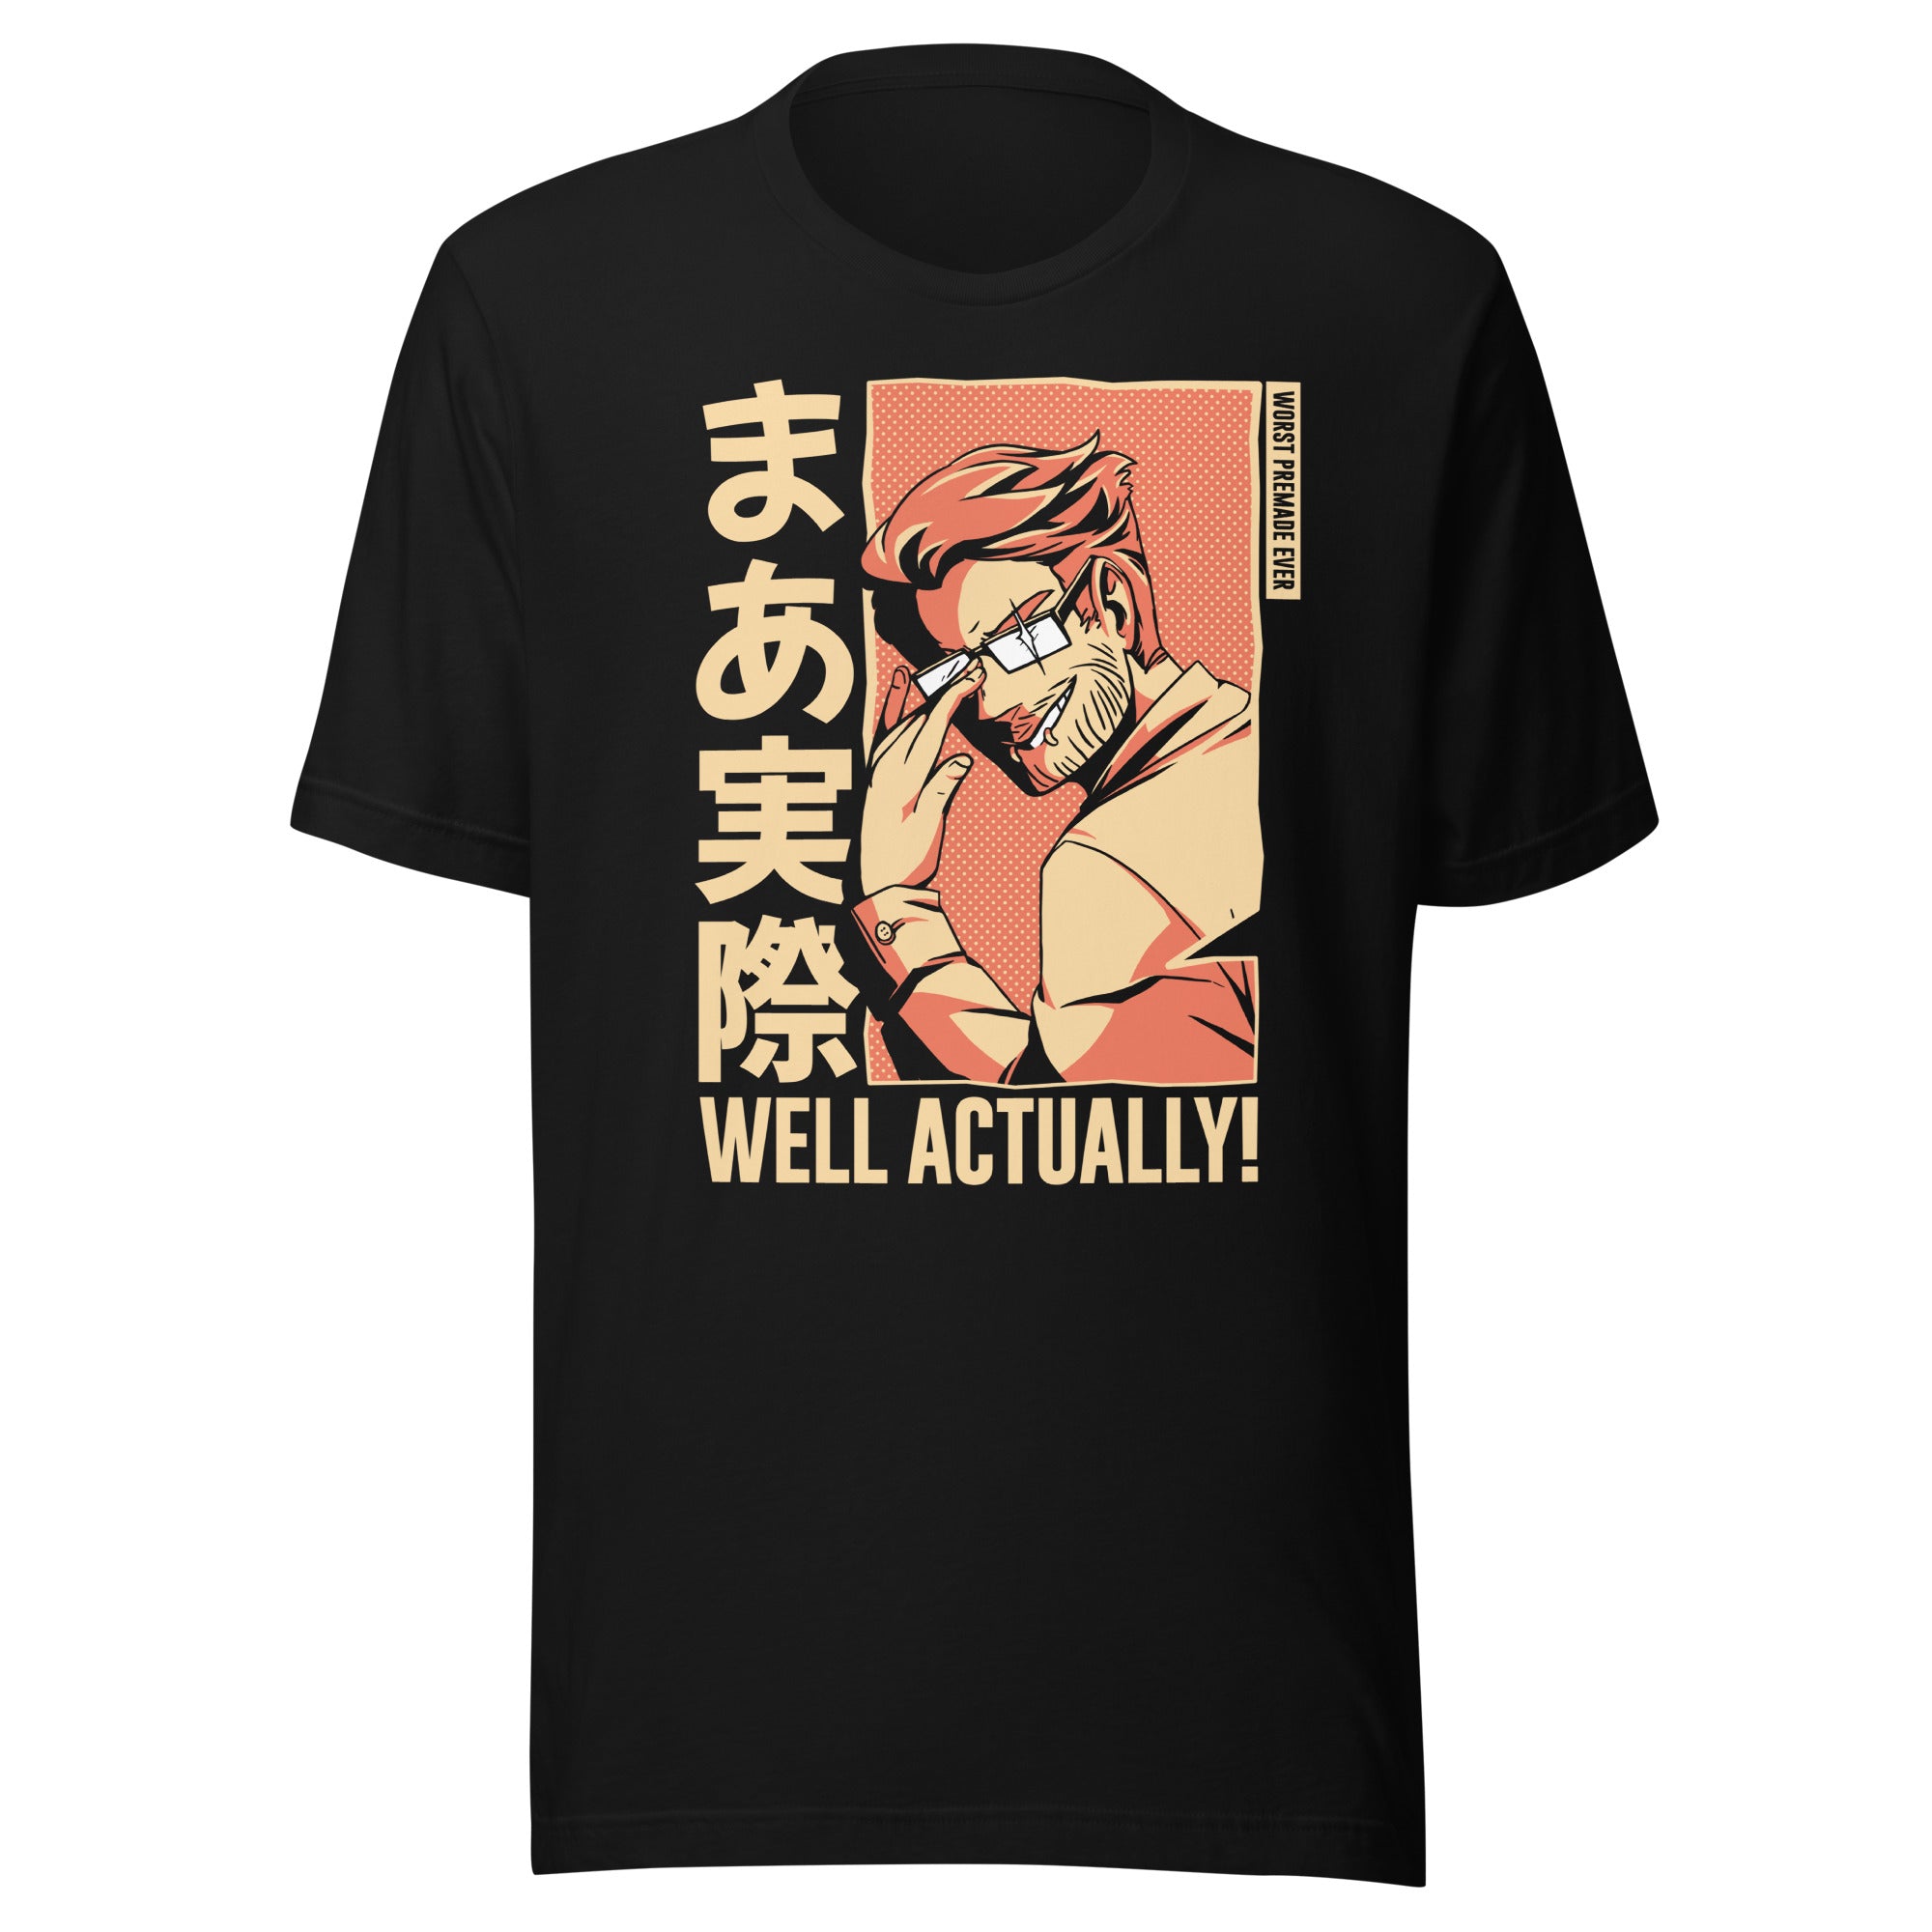 Well Actually! Unisex t-shirt